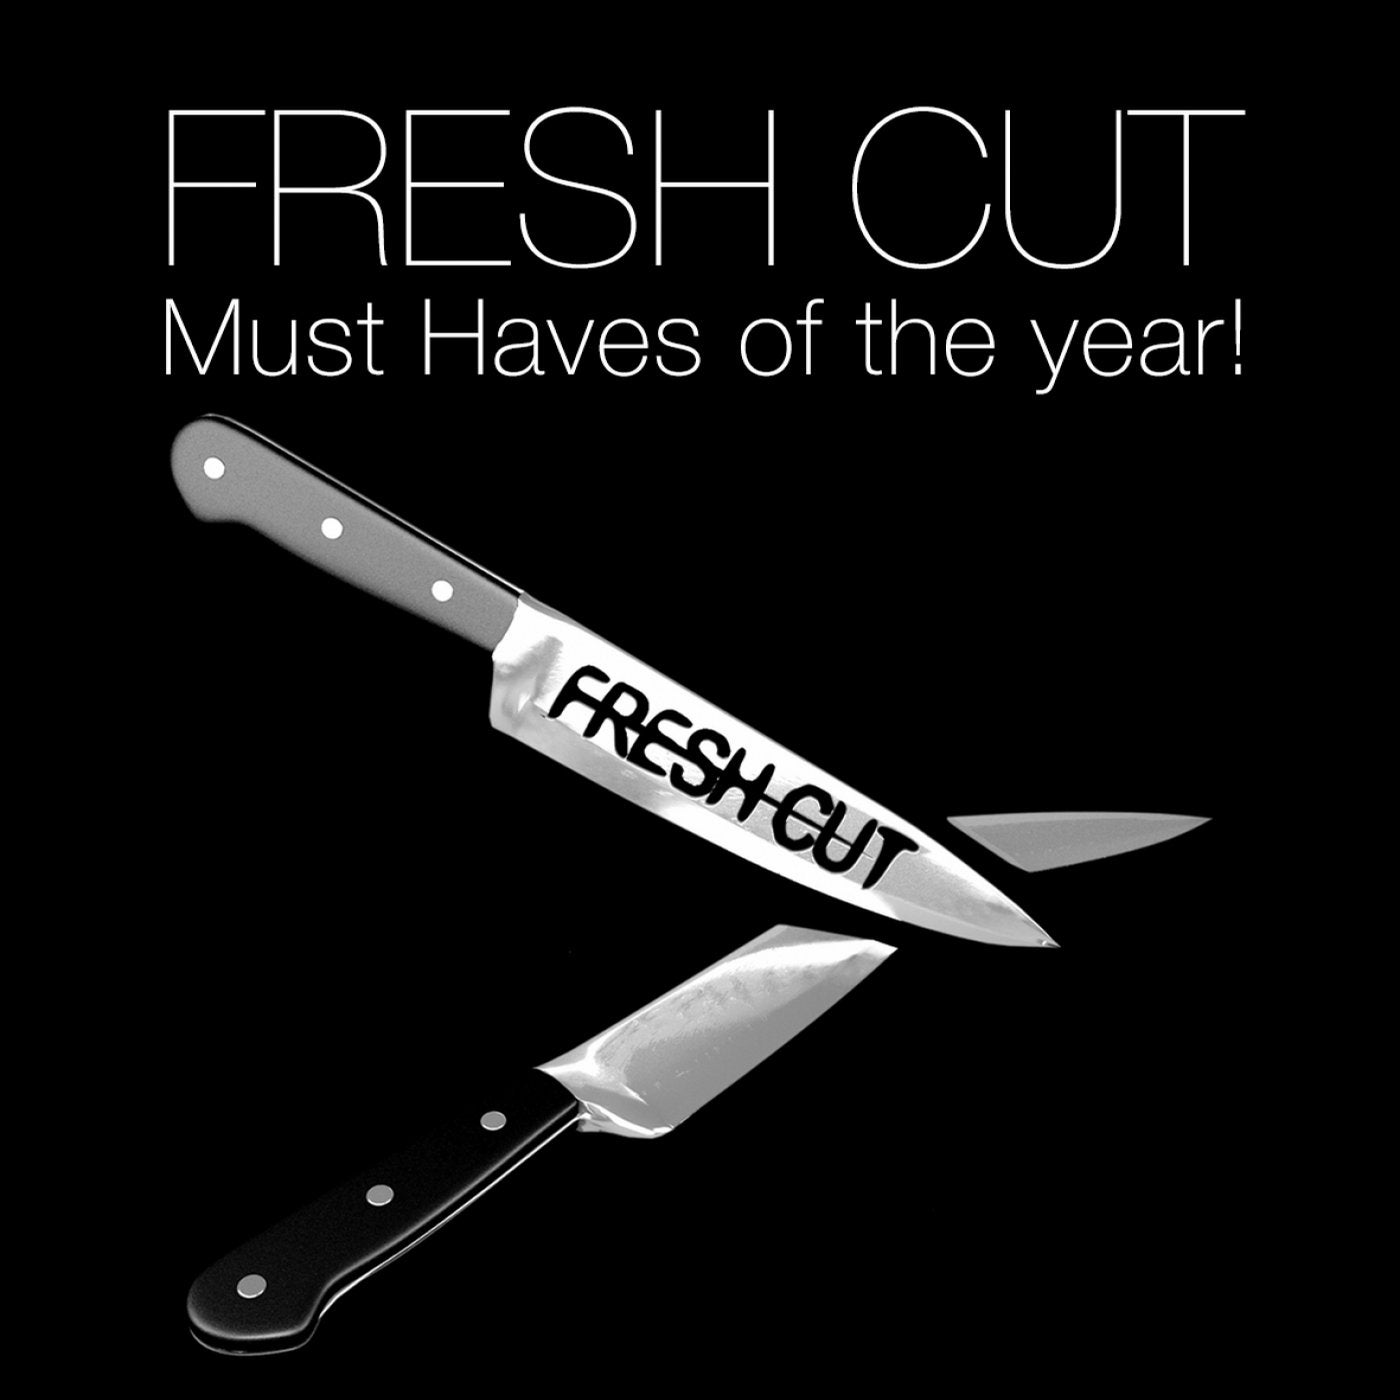 Fresh Cut Must Haves of the year